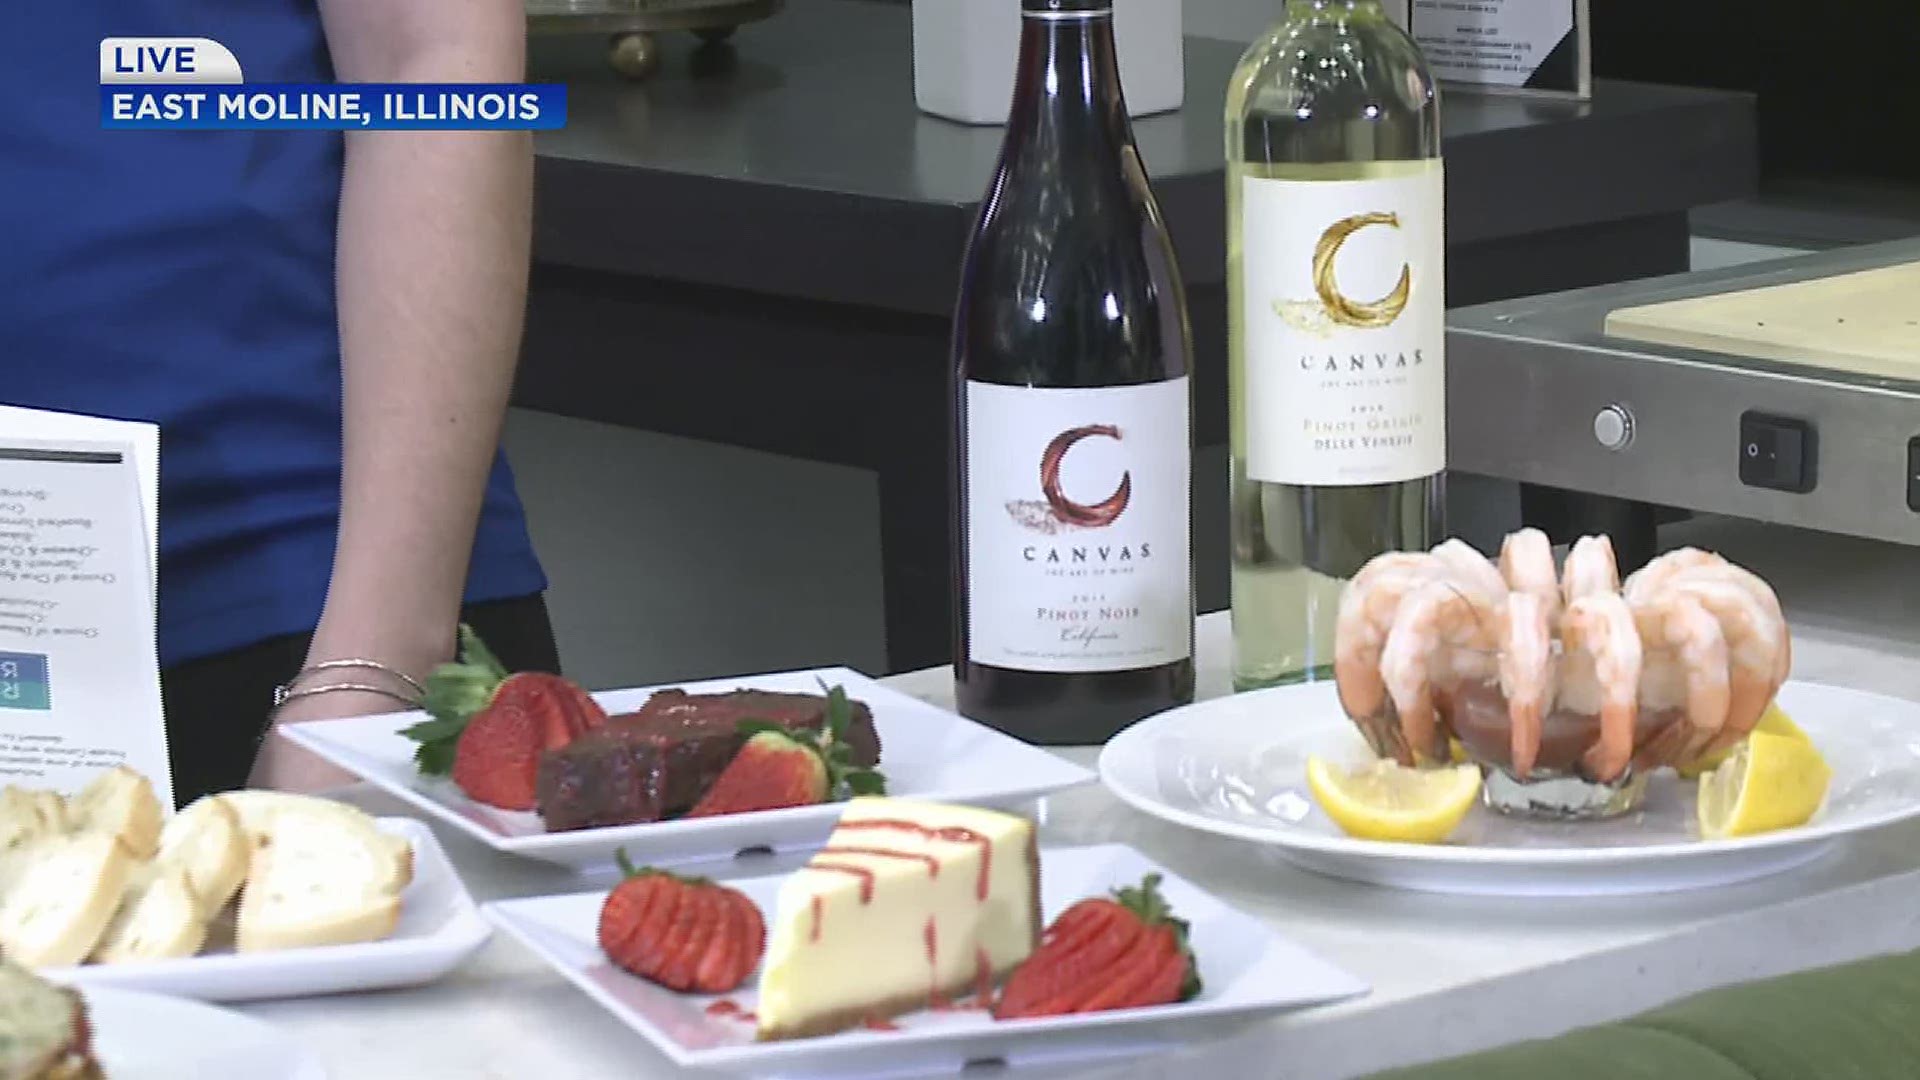 Angie talks to GM Ray Stoddard about what deals they have going on during QC Restaurant Week.